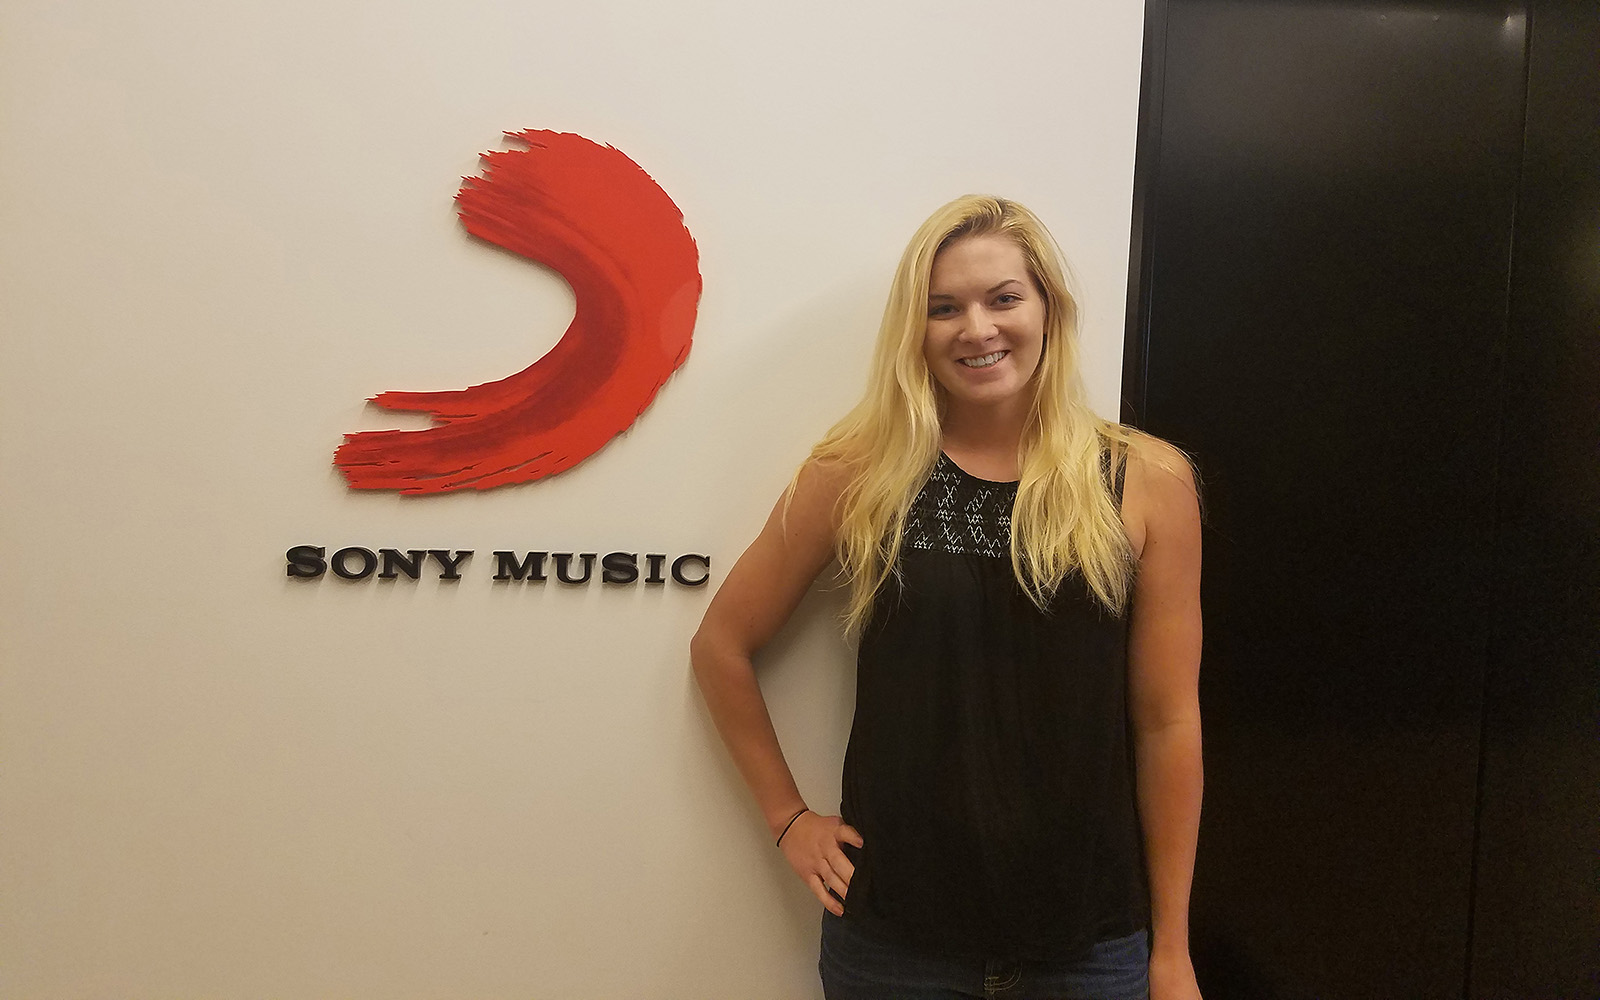 Maggie Quackenbush in the office during her first week at Sony Music. (Maggie Quackenbush)